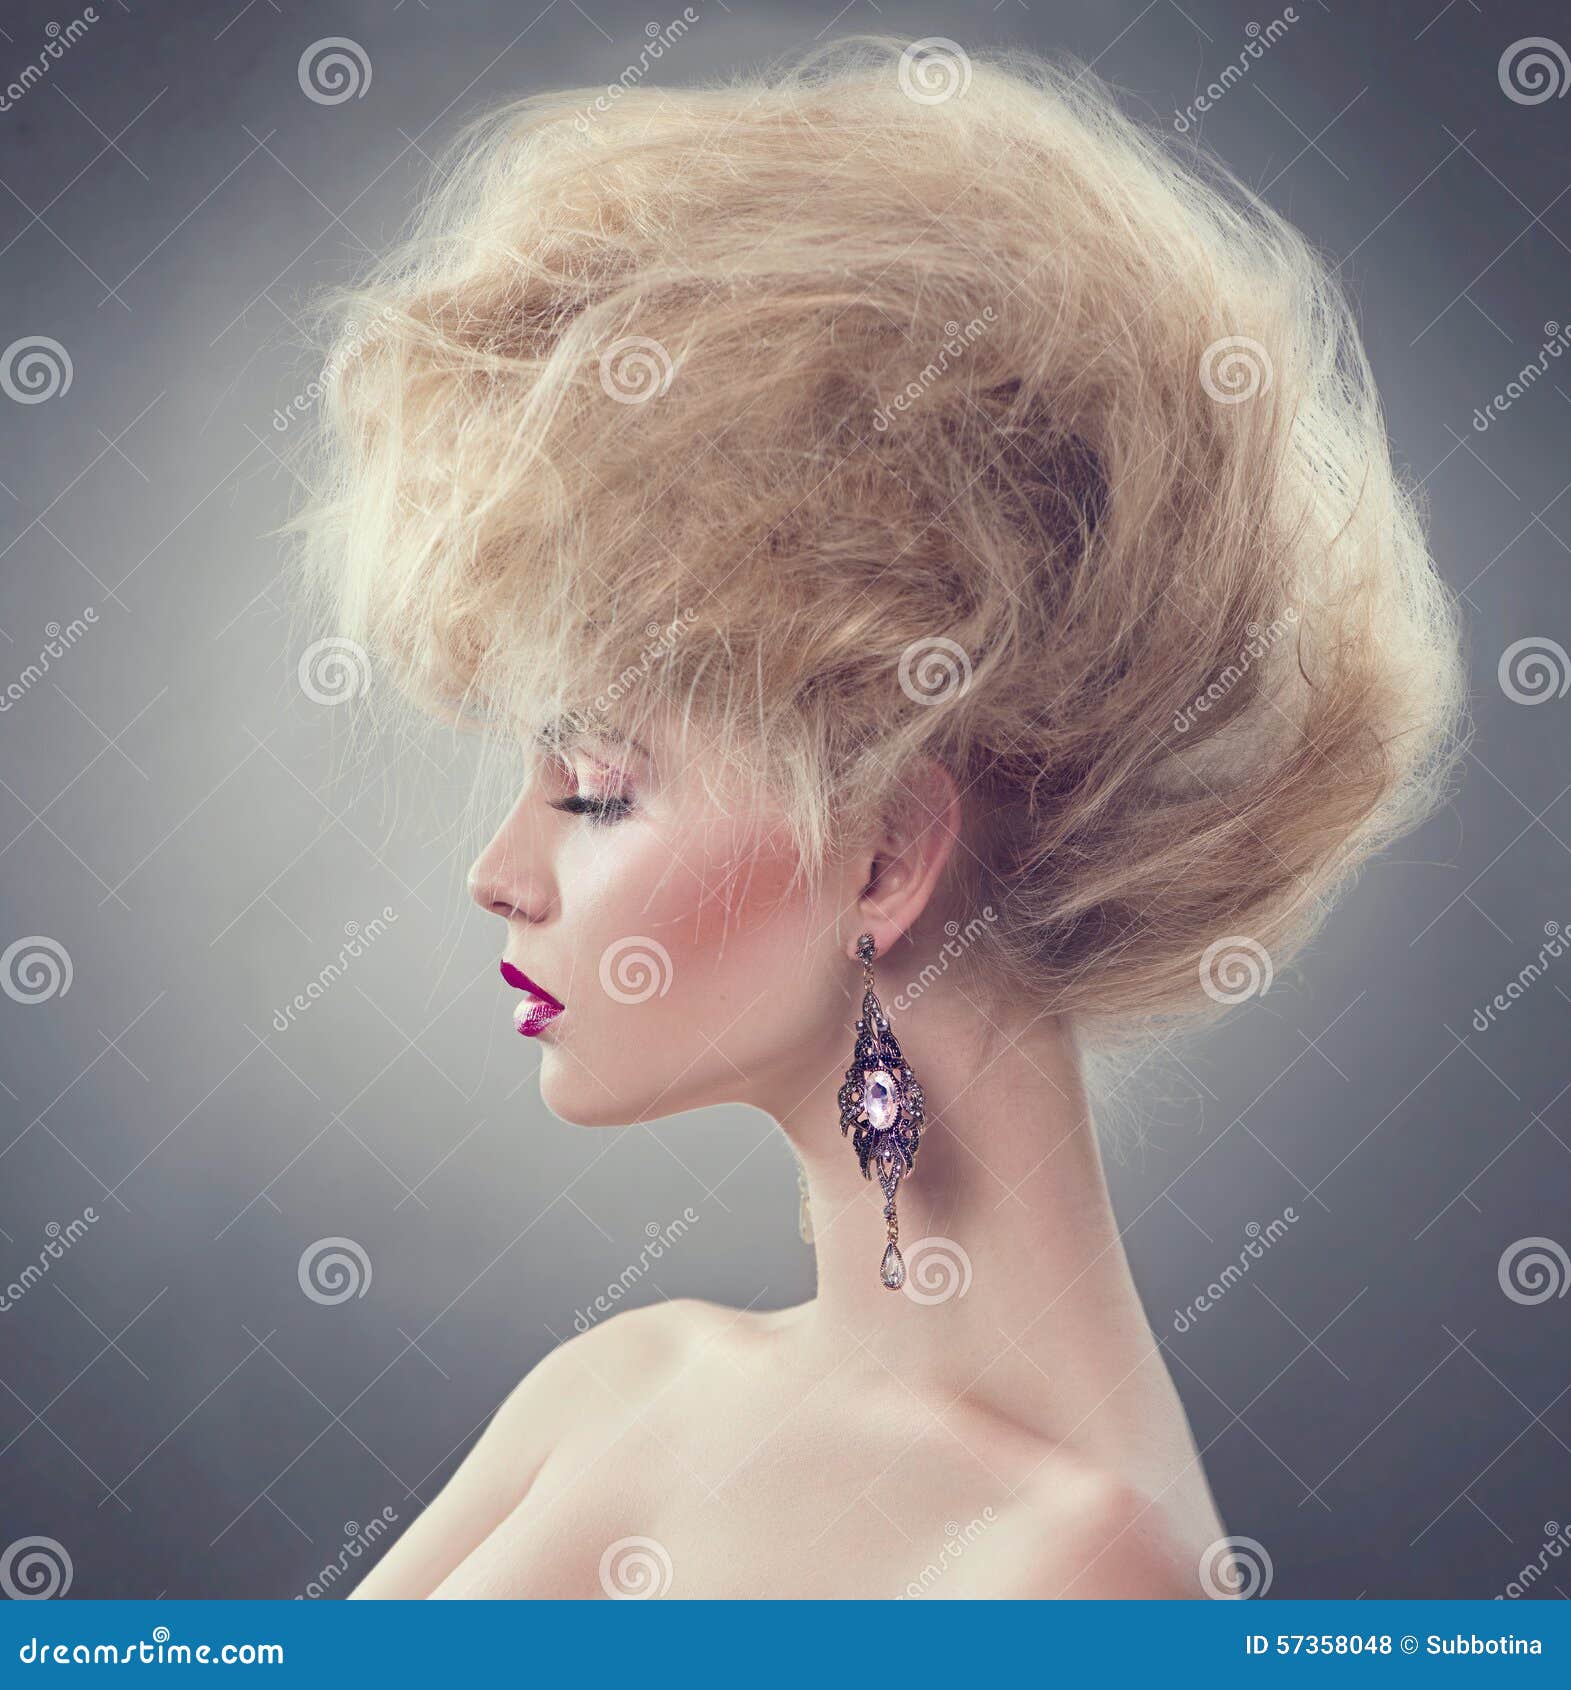 fashion model girl with updo hairstyle